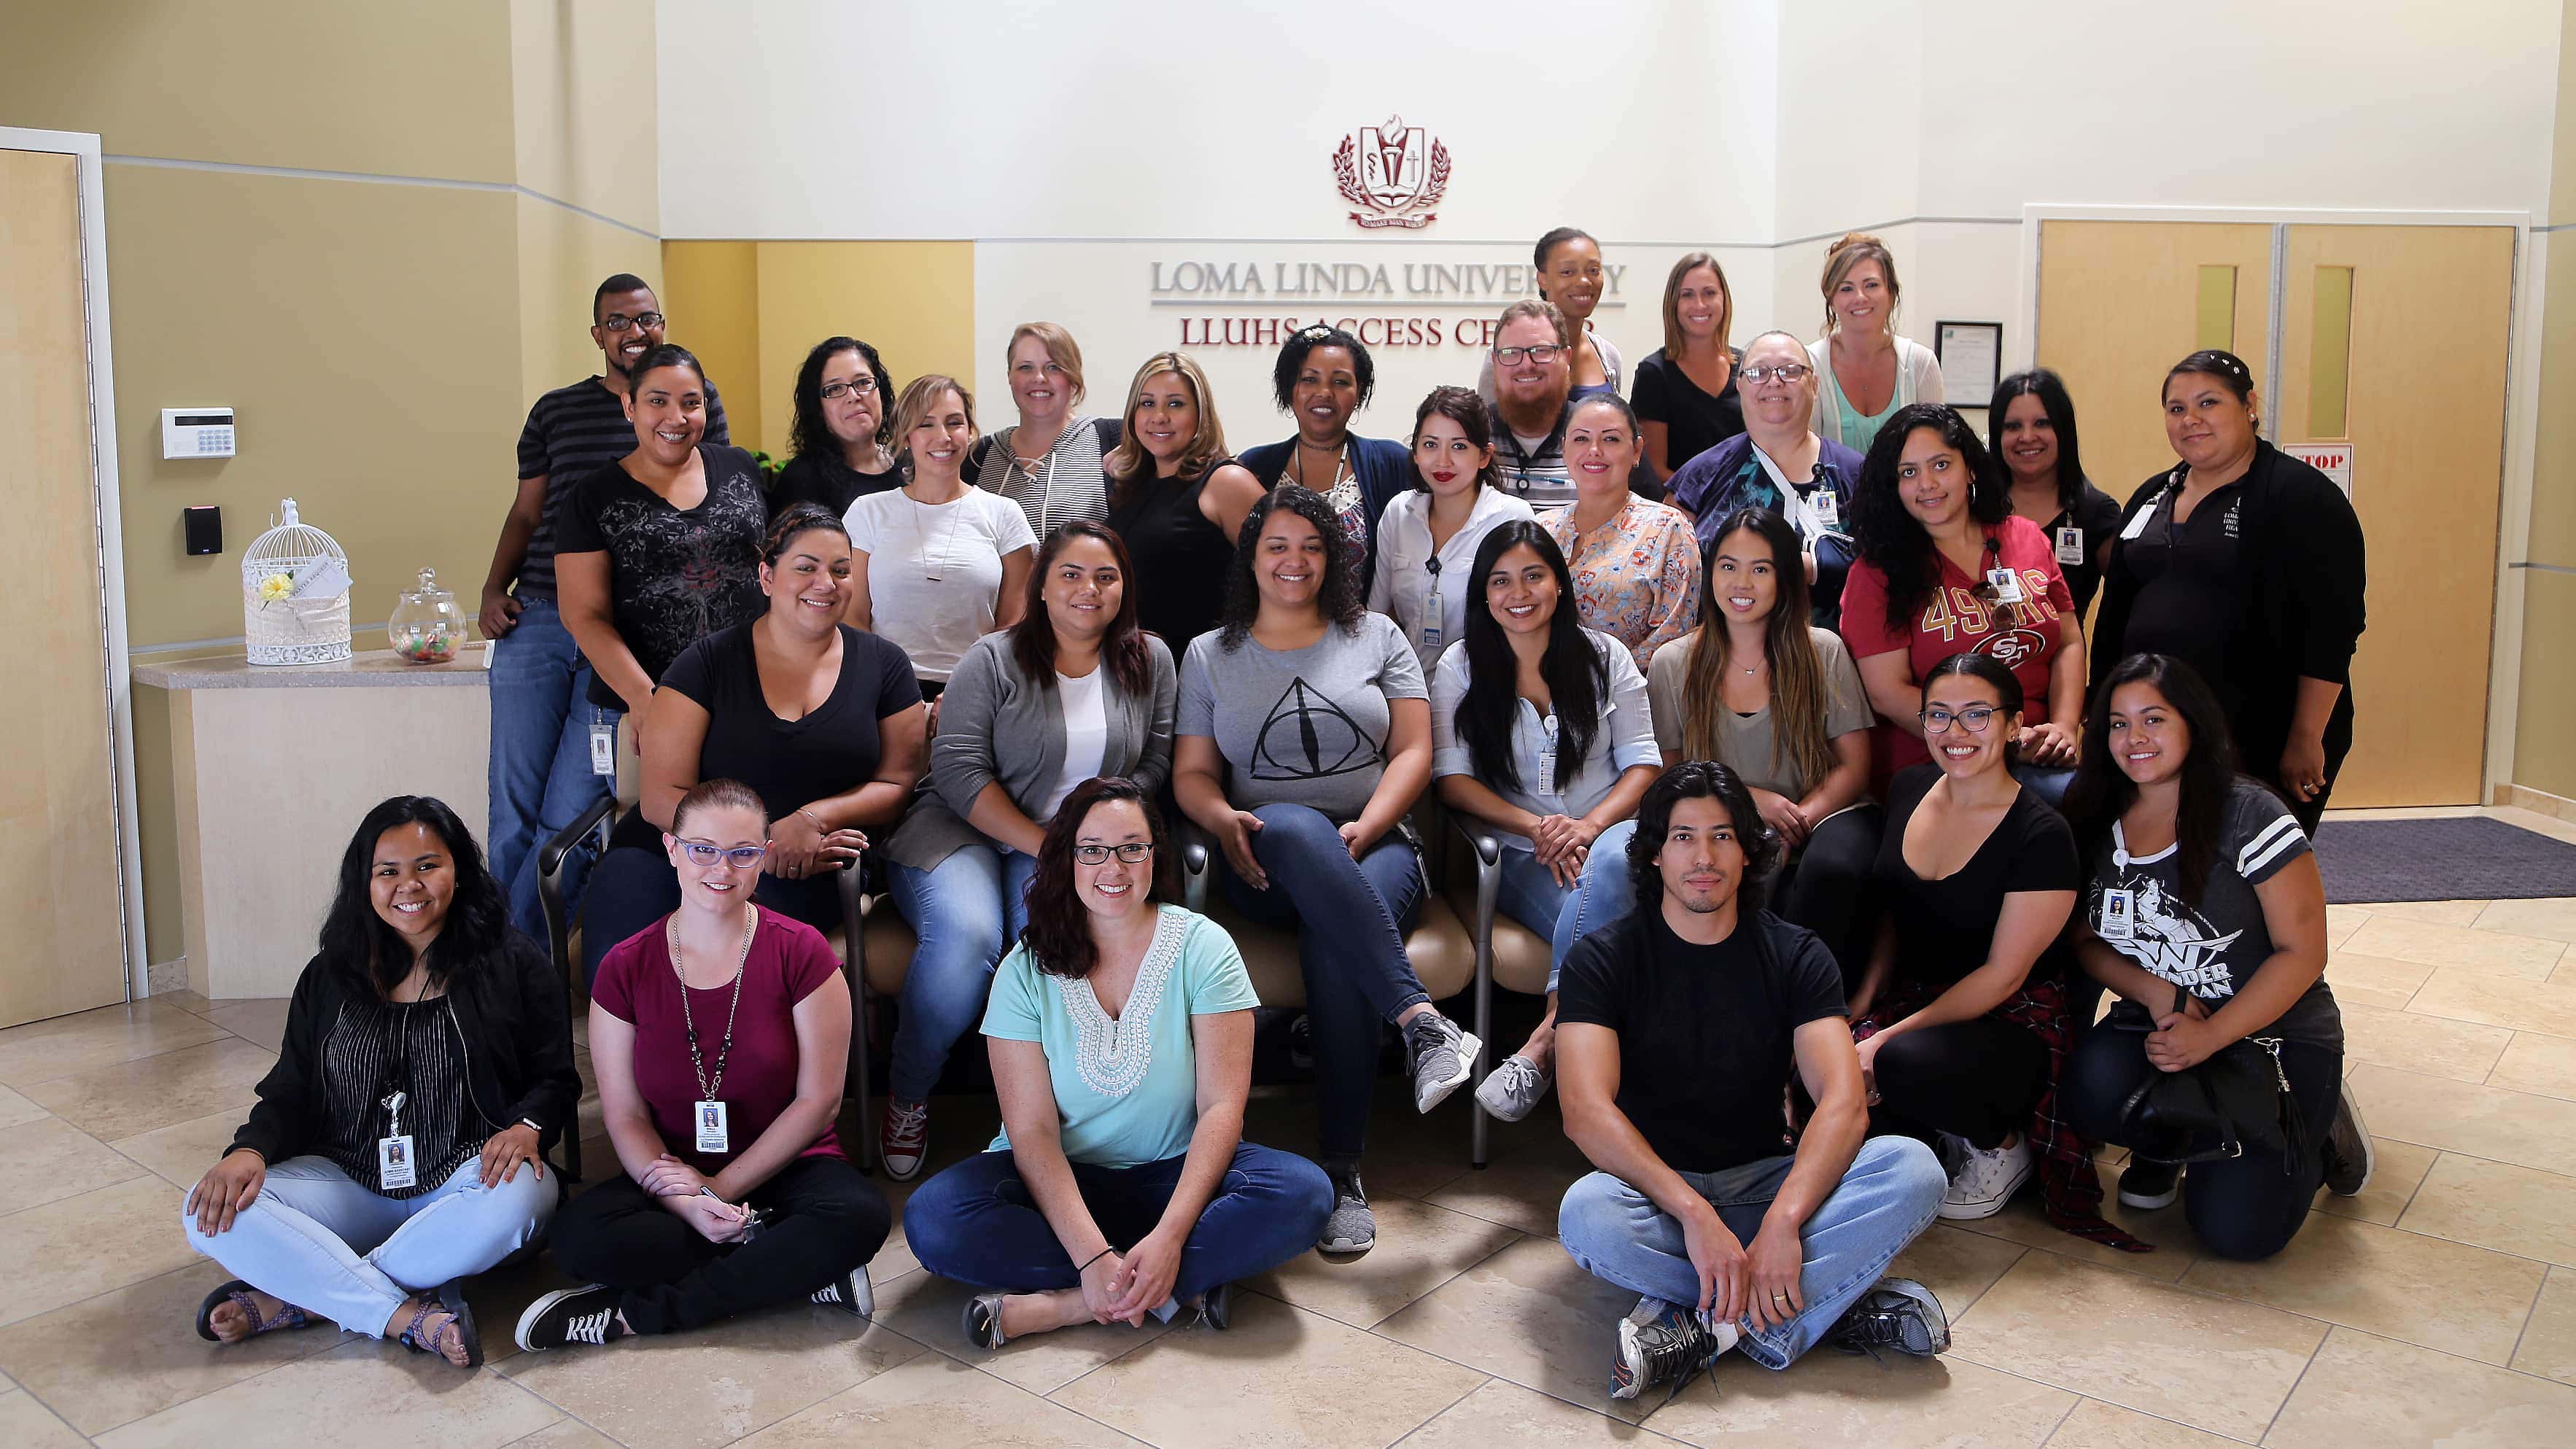 Loma Linda University Health Access Center employees are participating in Battle of the Steps, a 10-week competition designed to help them stay active. [Photo: Loma Linda University News]